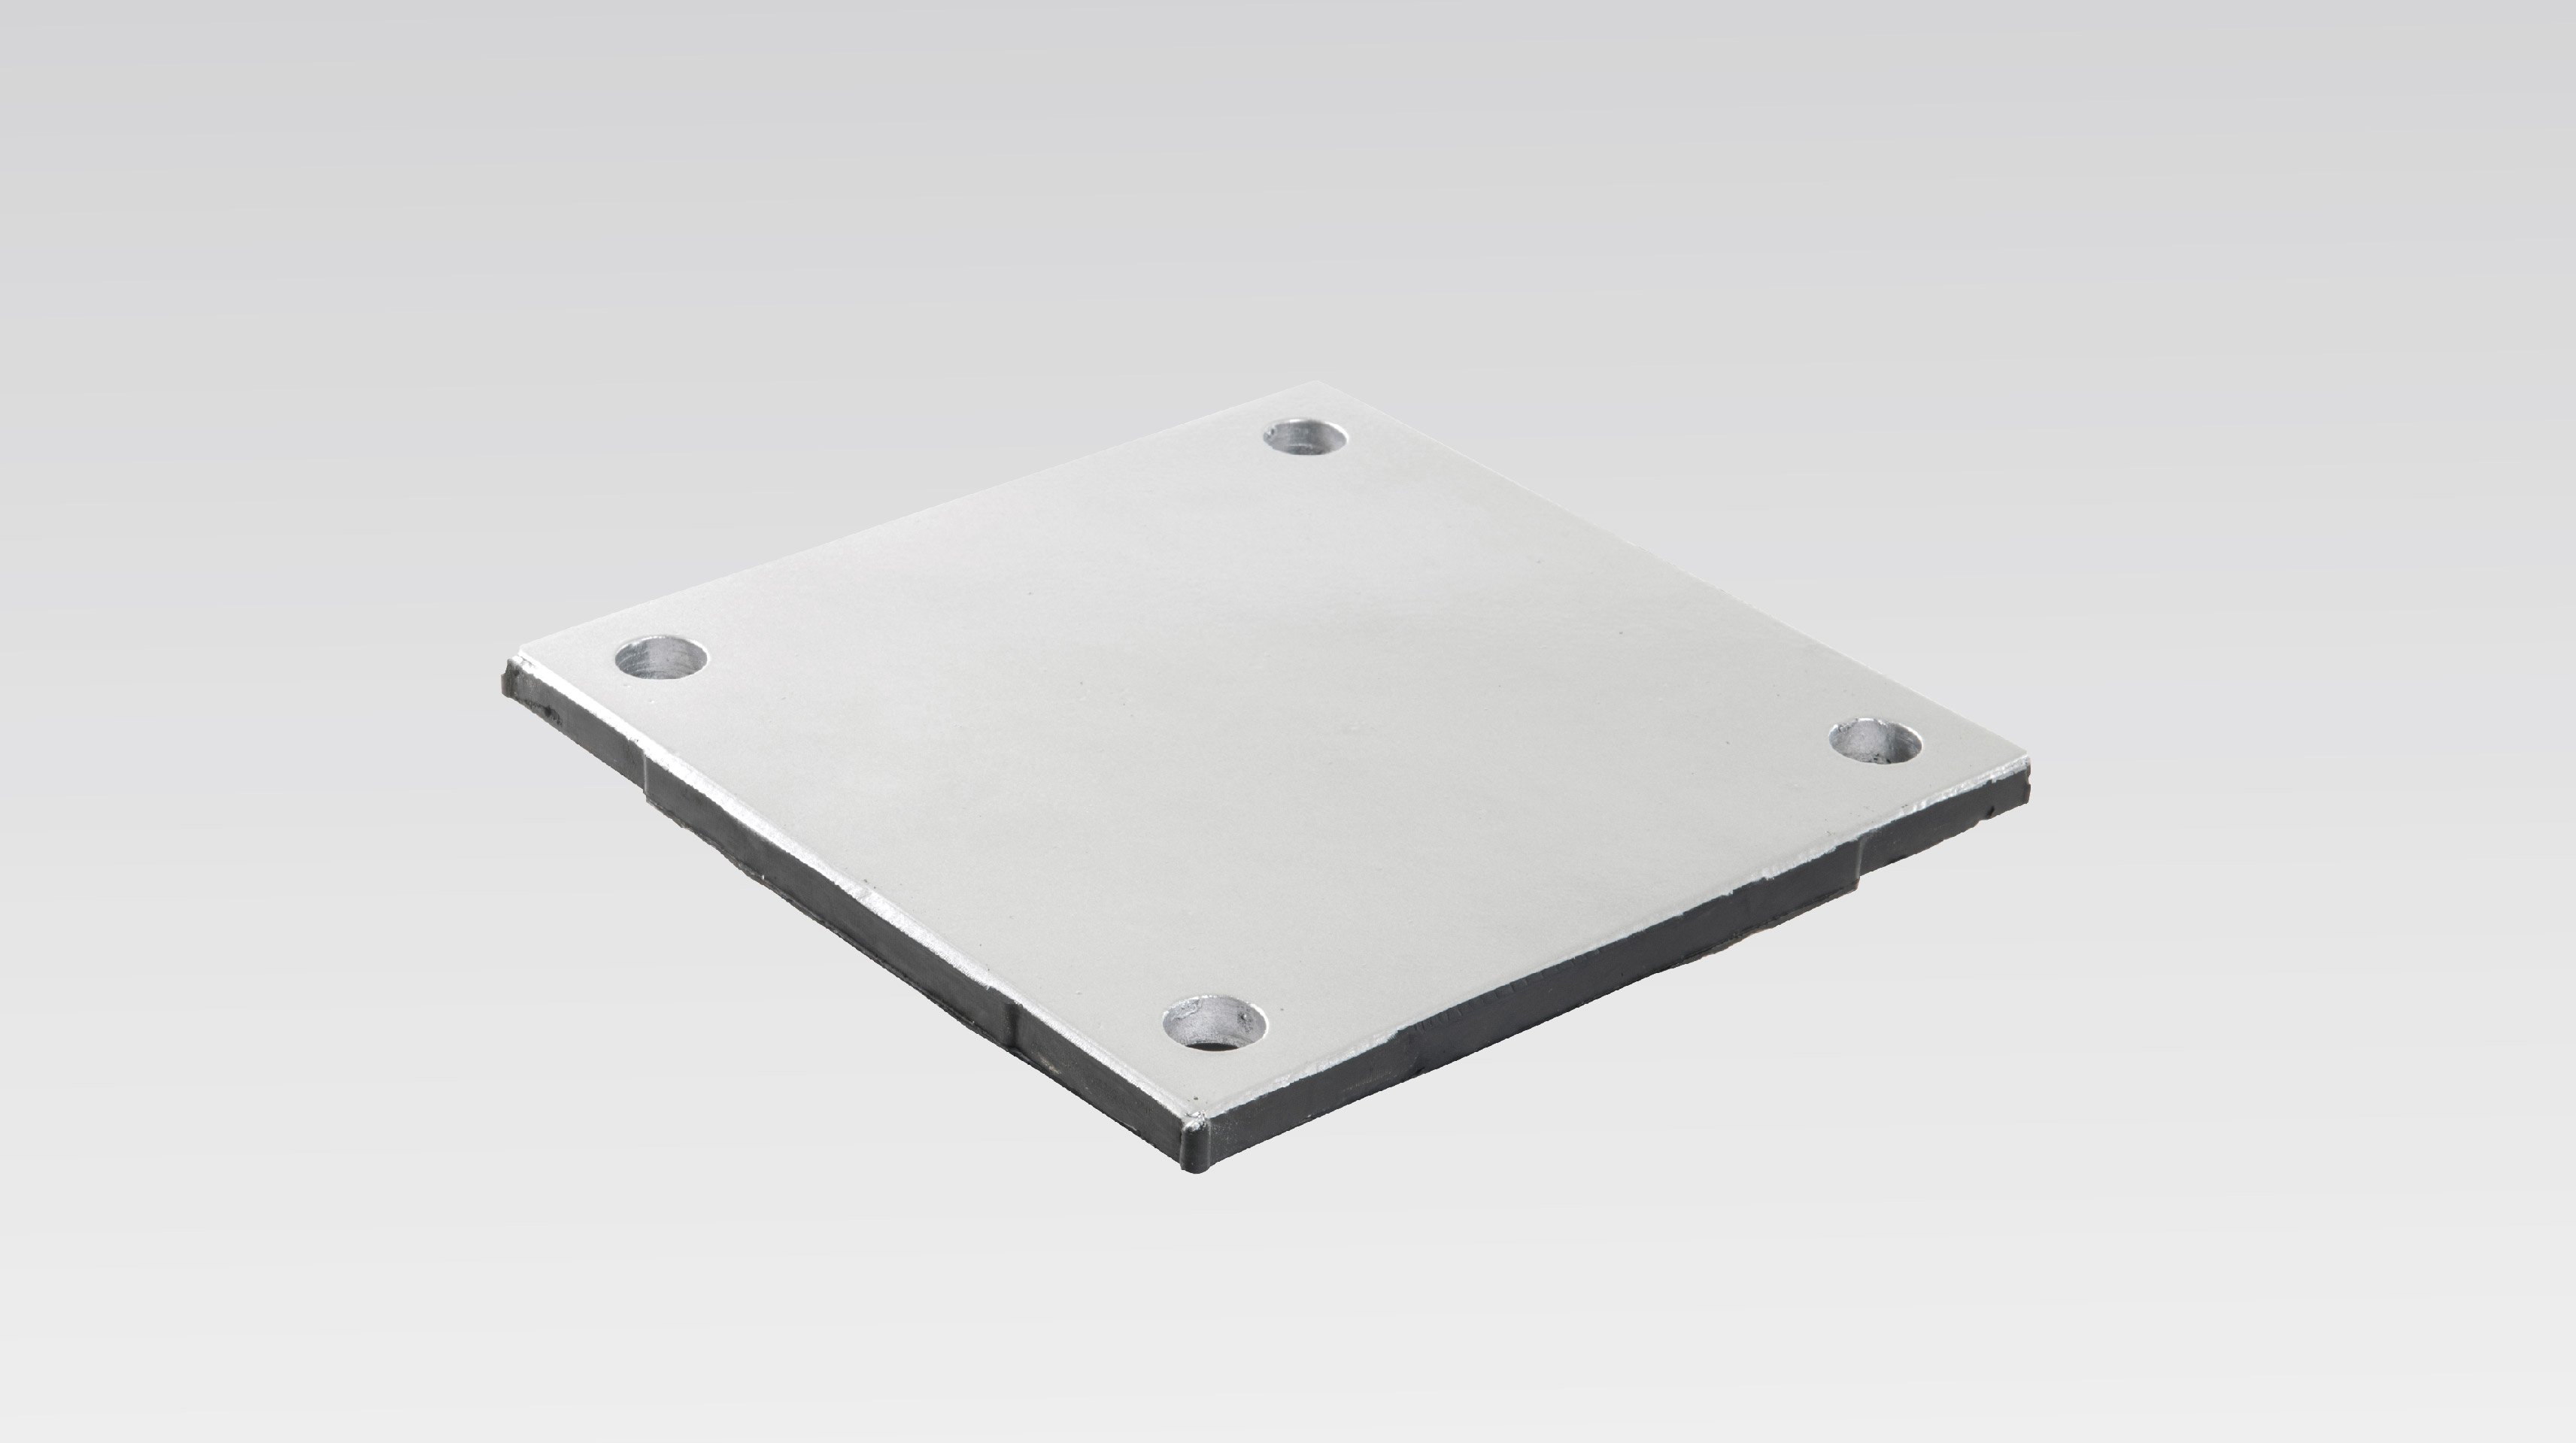 DURABLE AND ROBUST STEEL PLATE